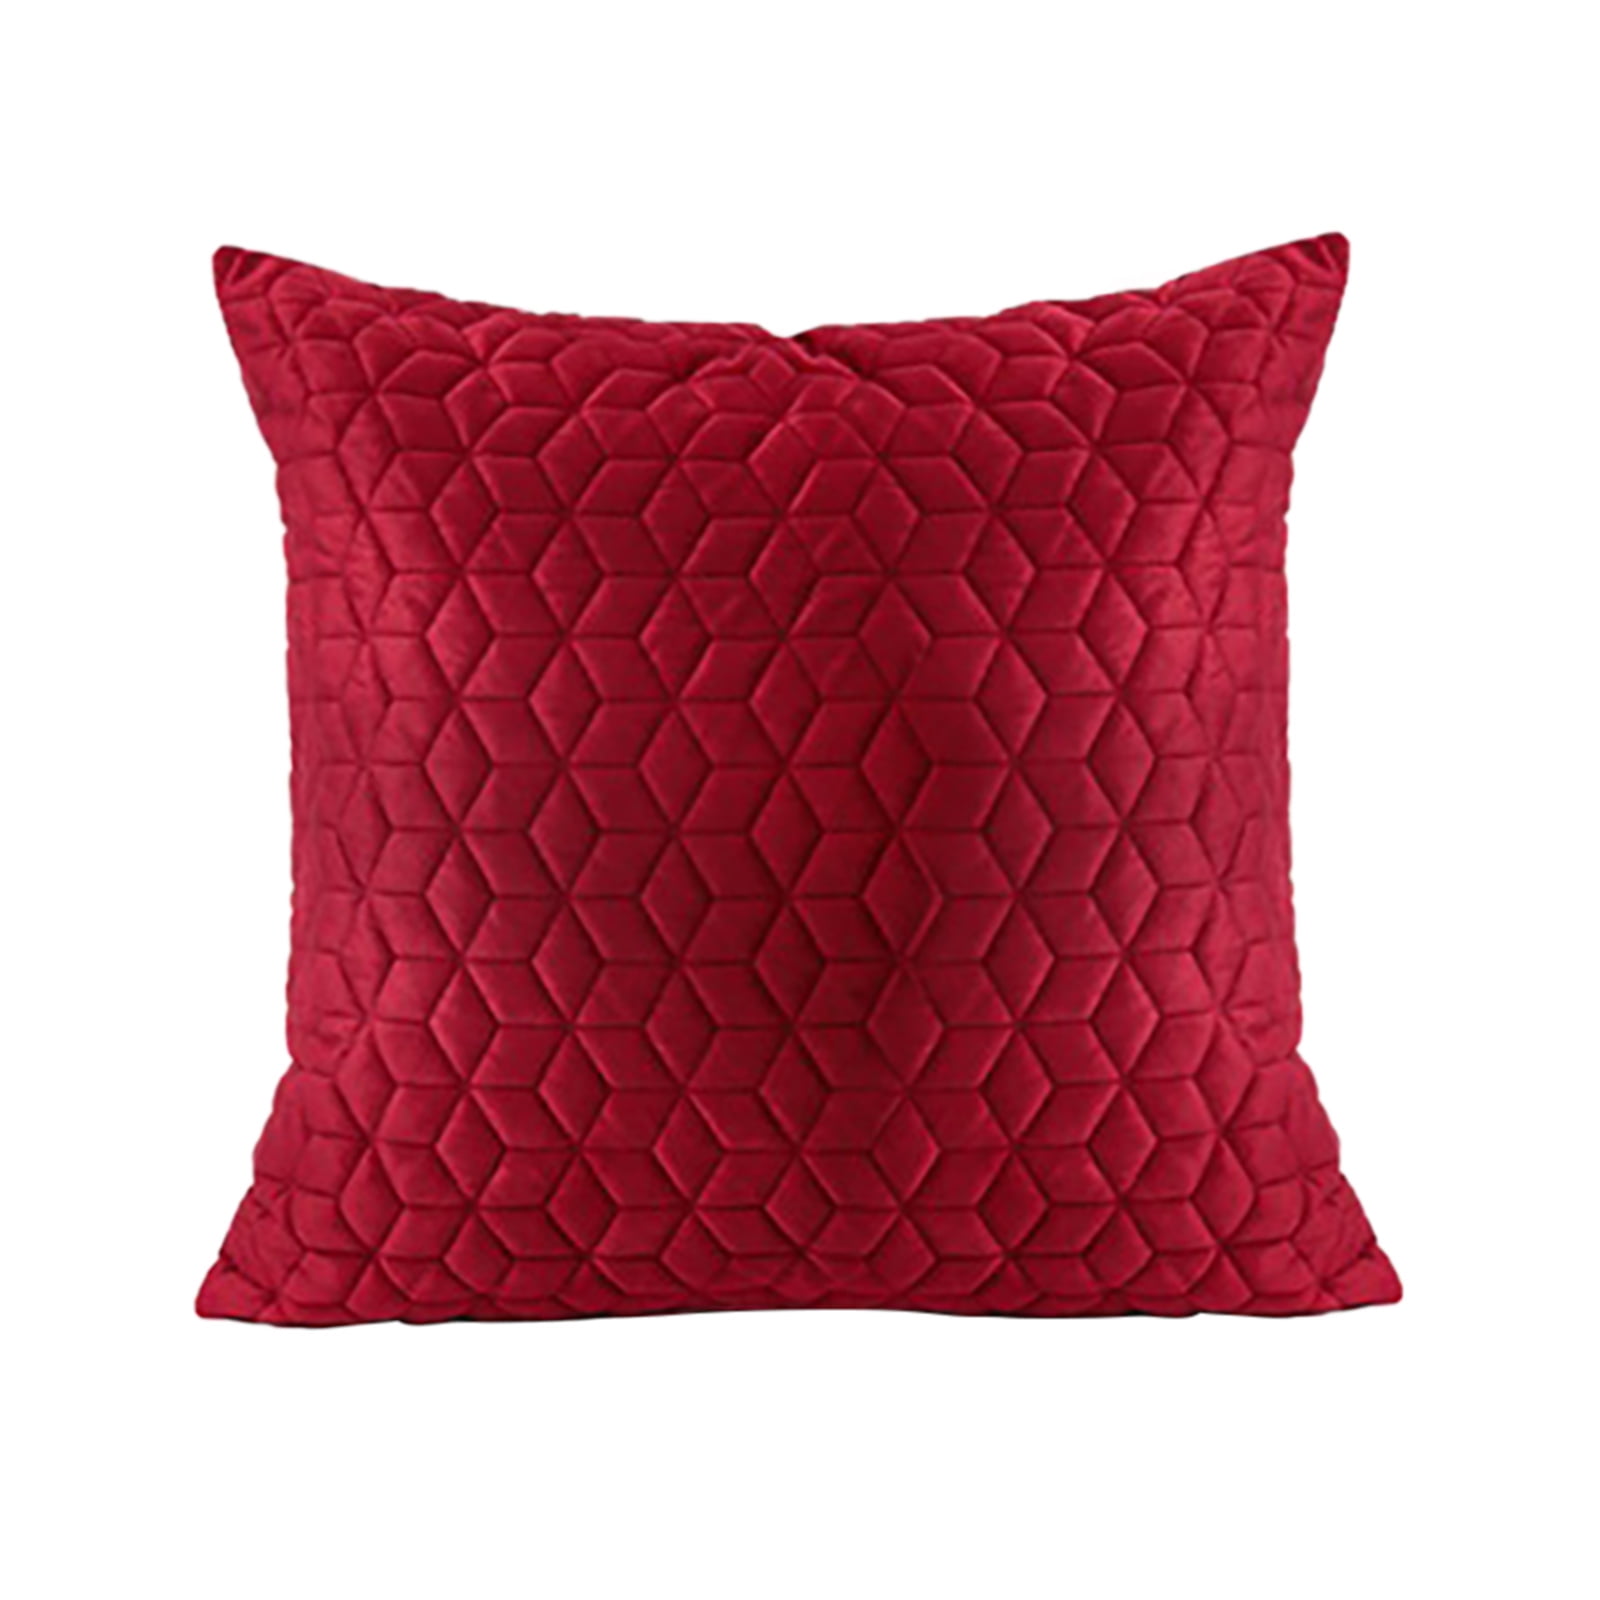 Big Sale! Plertrvy Doll, Hexagonal Pattern Embossed Pillow Cover Bed ...